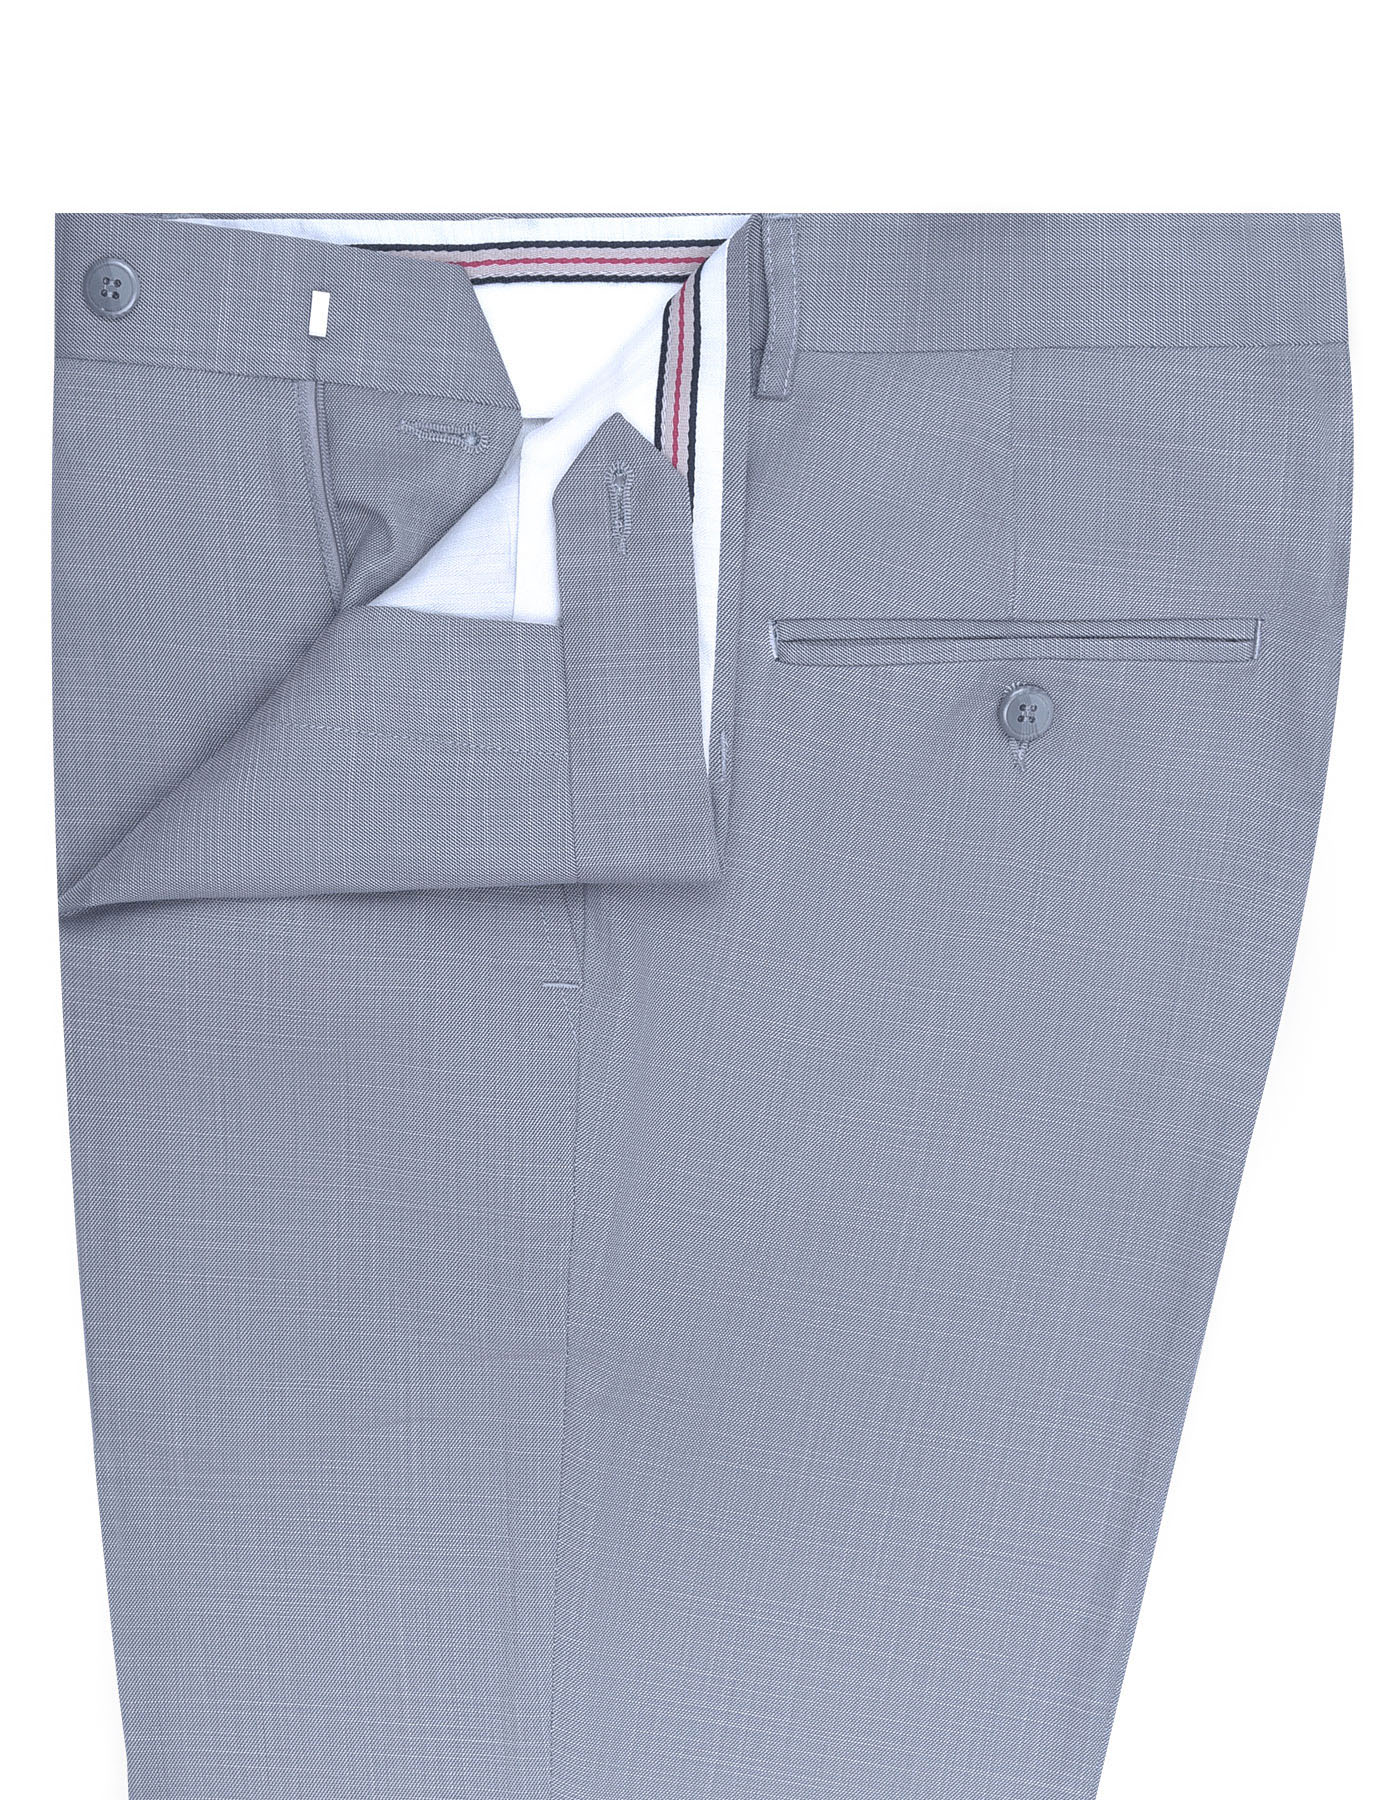 L Grey Texture Formal Trouser Tailored Smart Fit